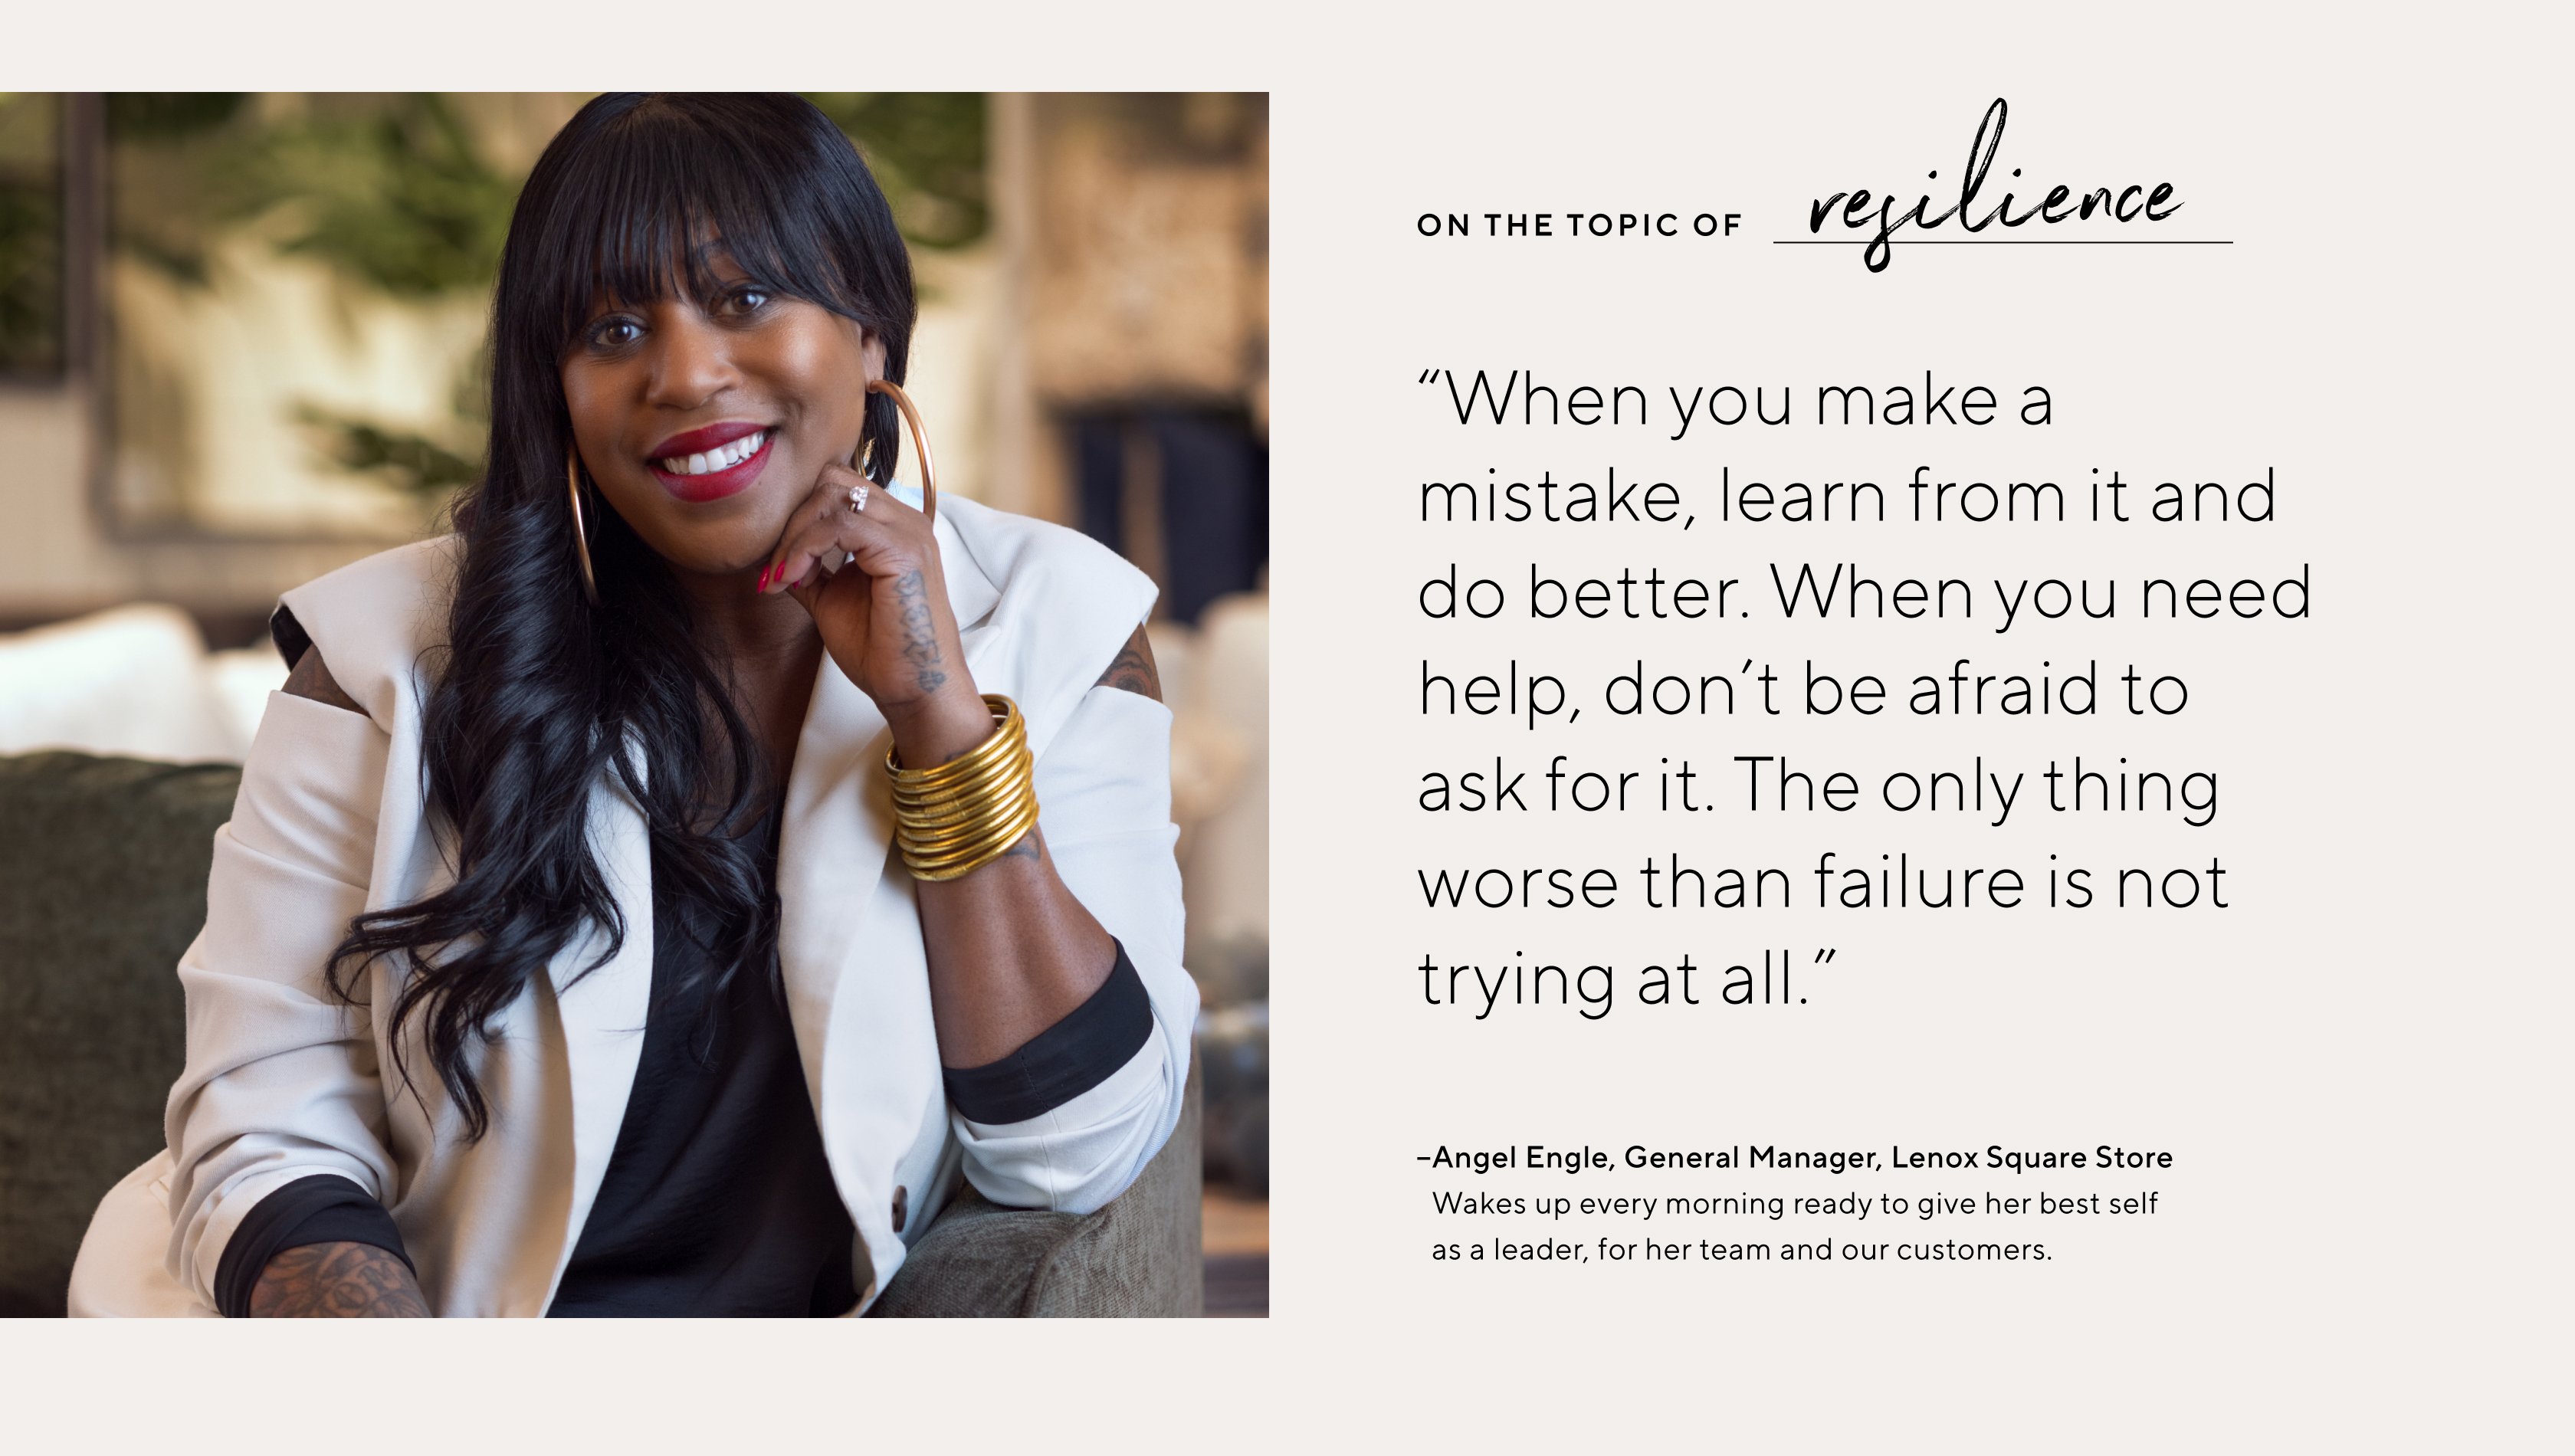 "When you make a mistake, learn from it and do better." When you need help, don't be afraid to ask for it. The only thing worse than failure is not trying at all."